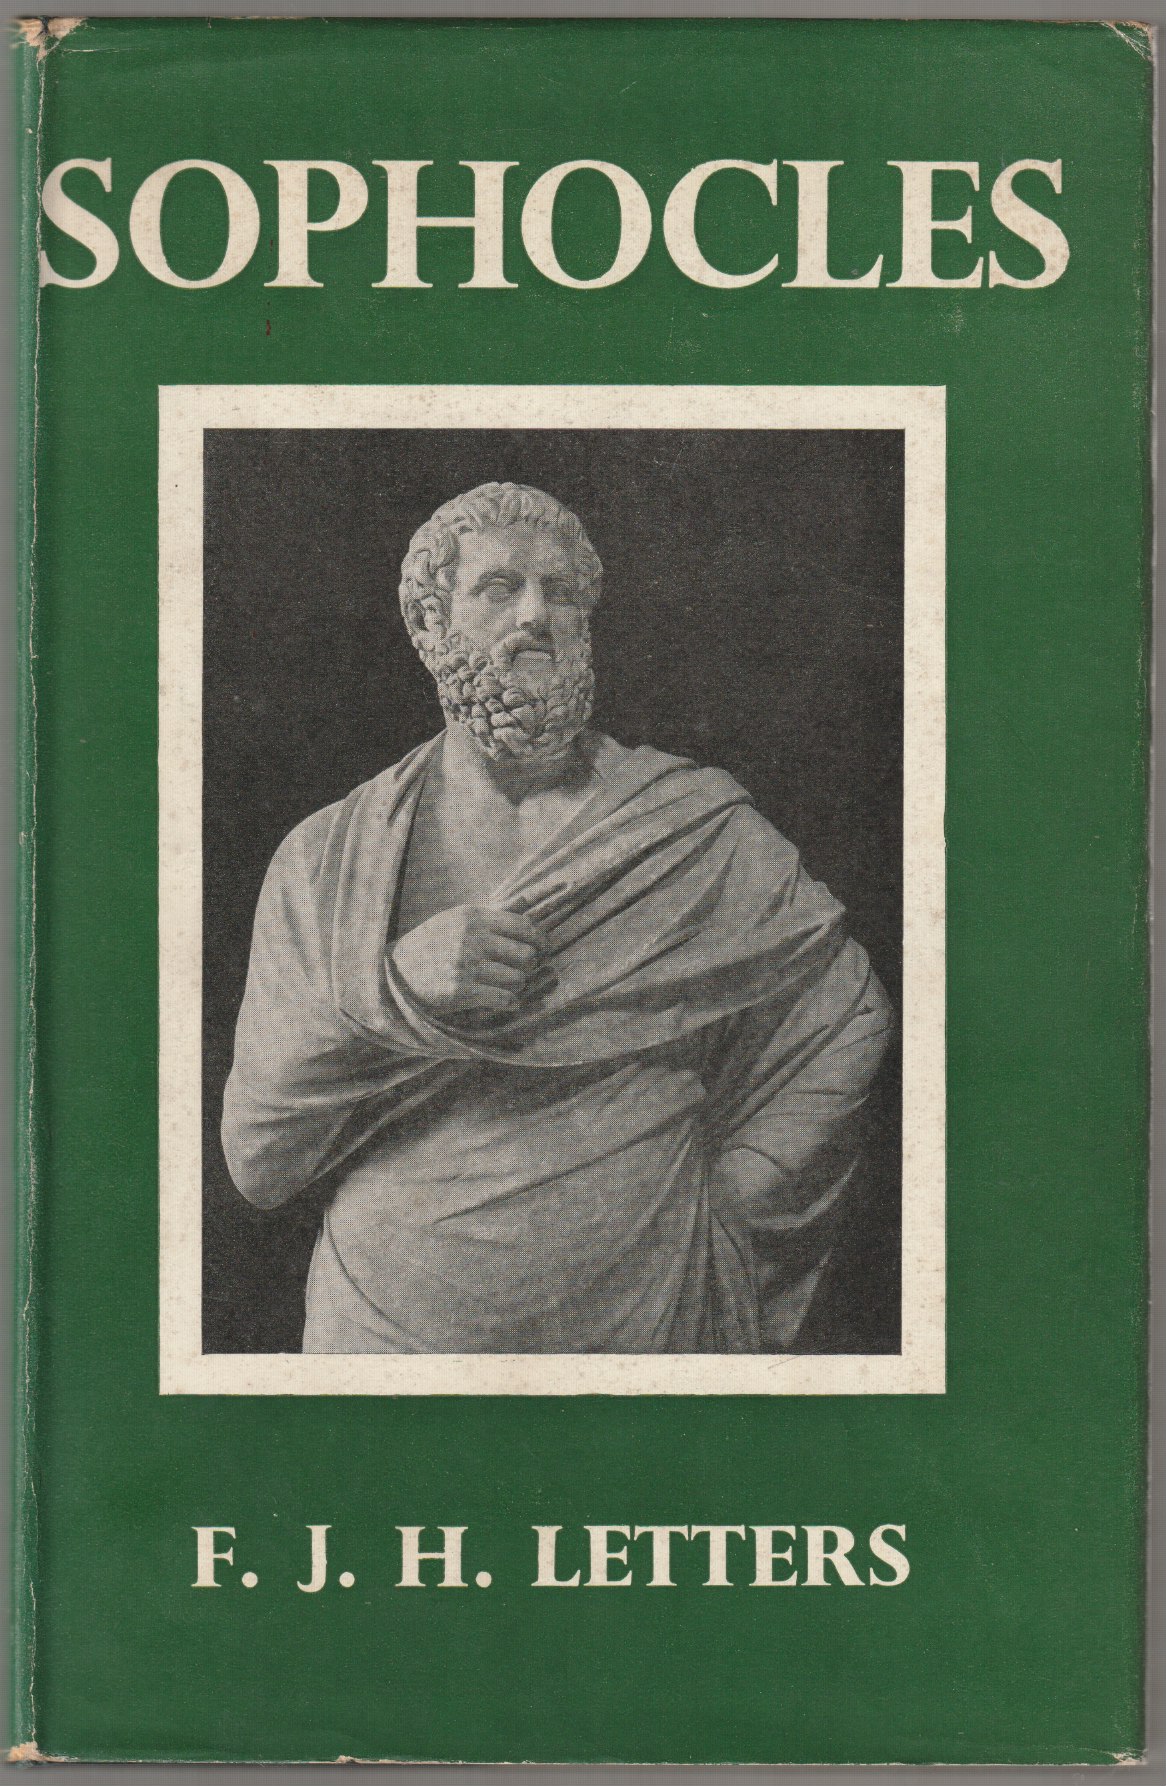 The life and work of Sophocles.